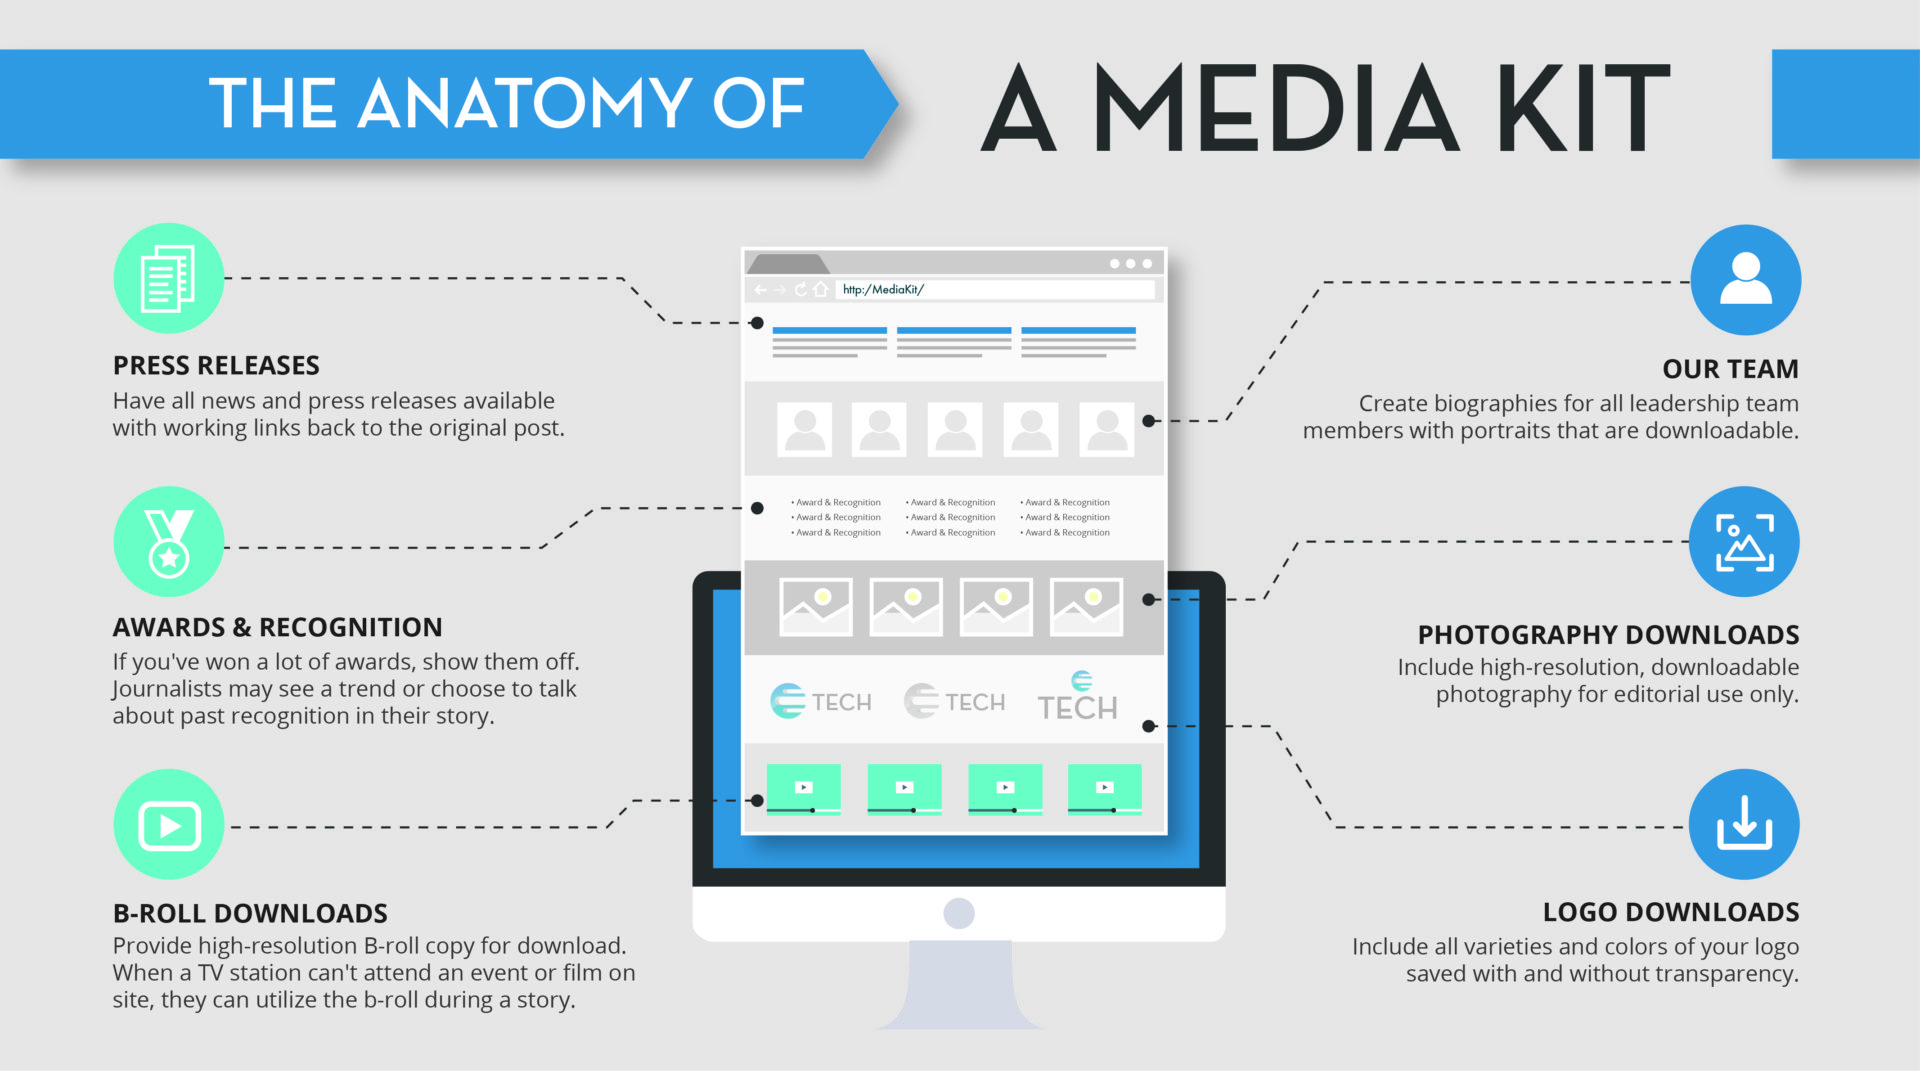 Why Media Kits are Great for Journalists & Your Company